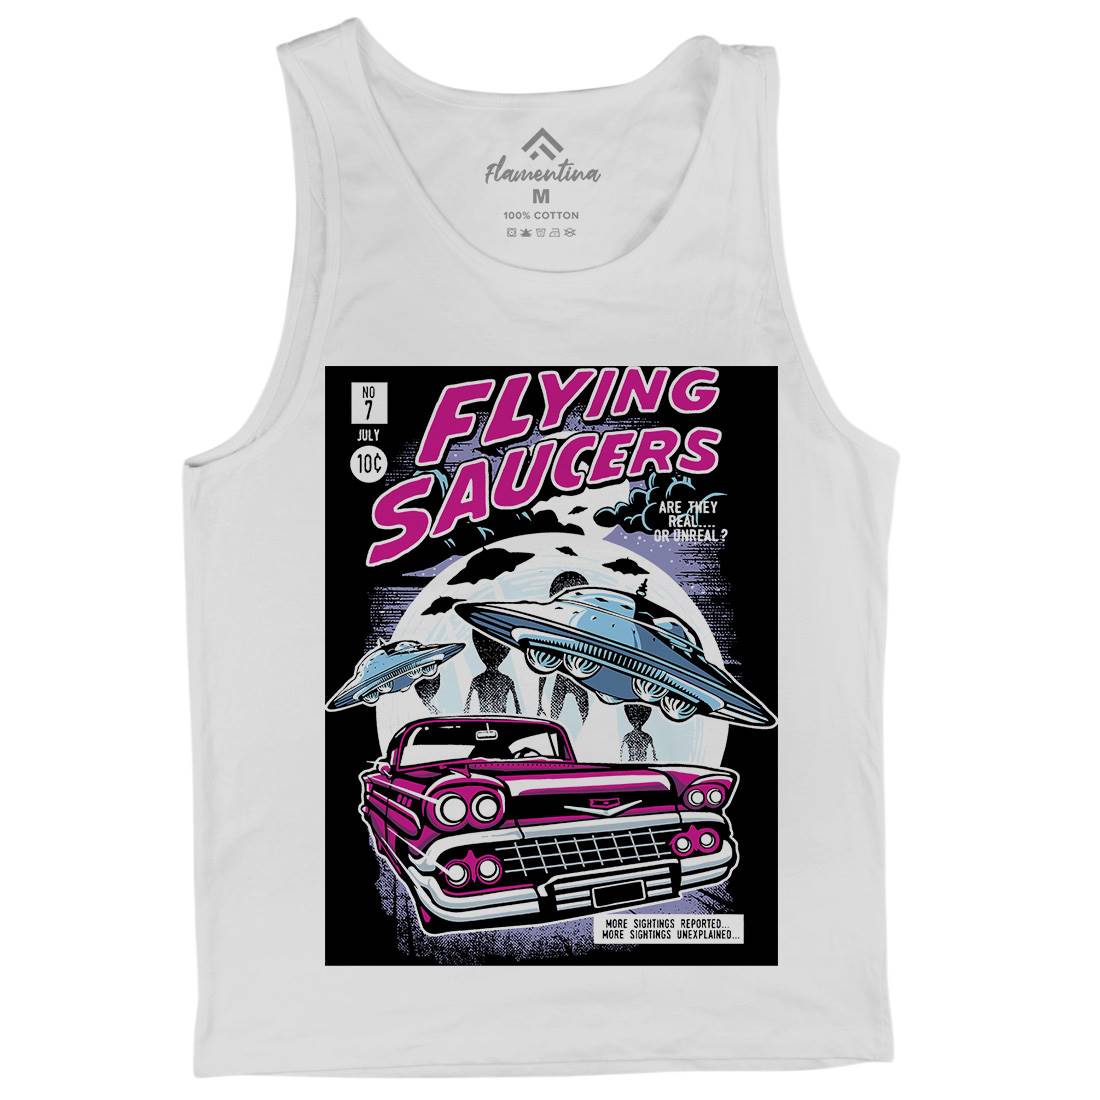 Flying Saucers Mens Tank Top Vest Space A531